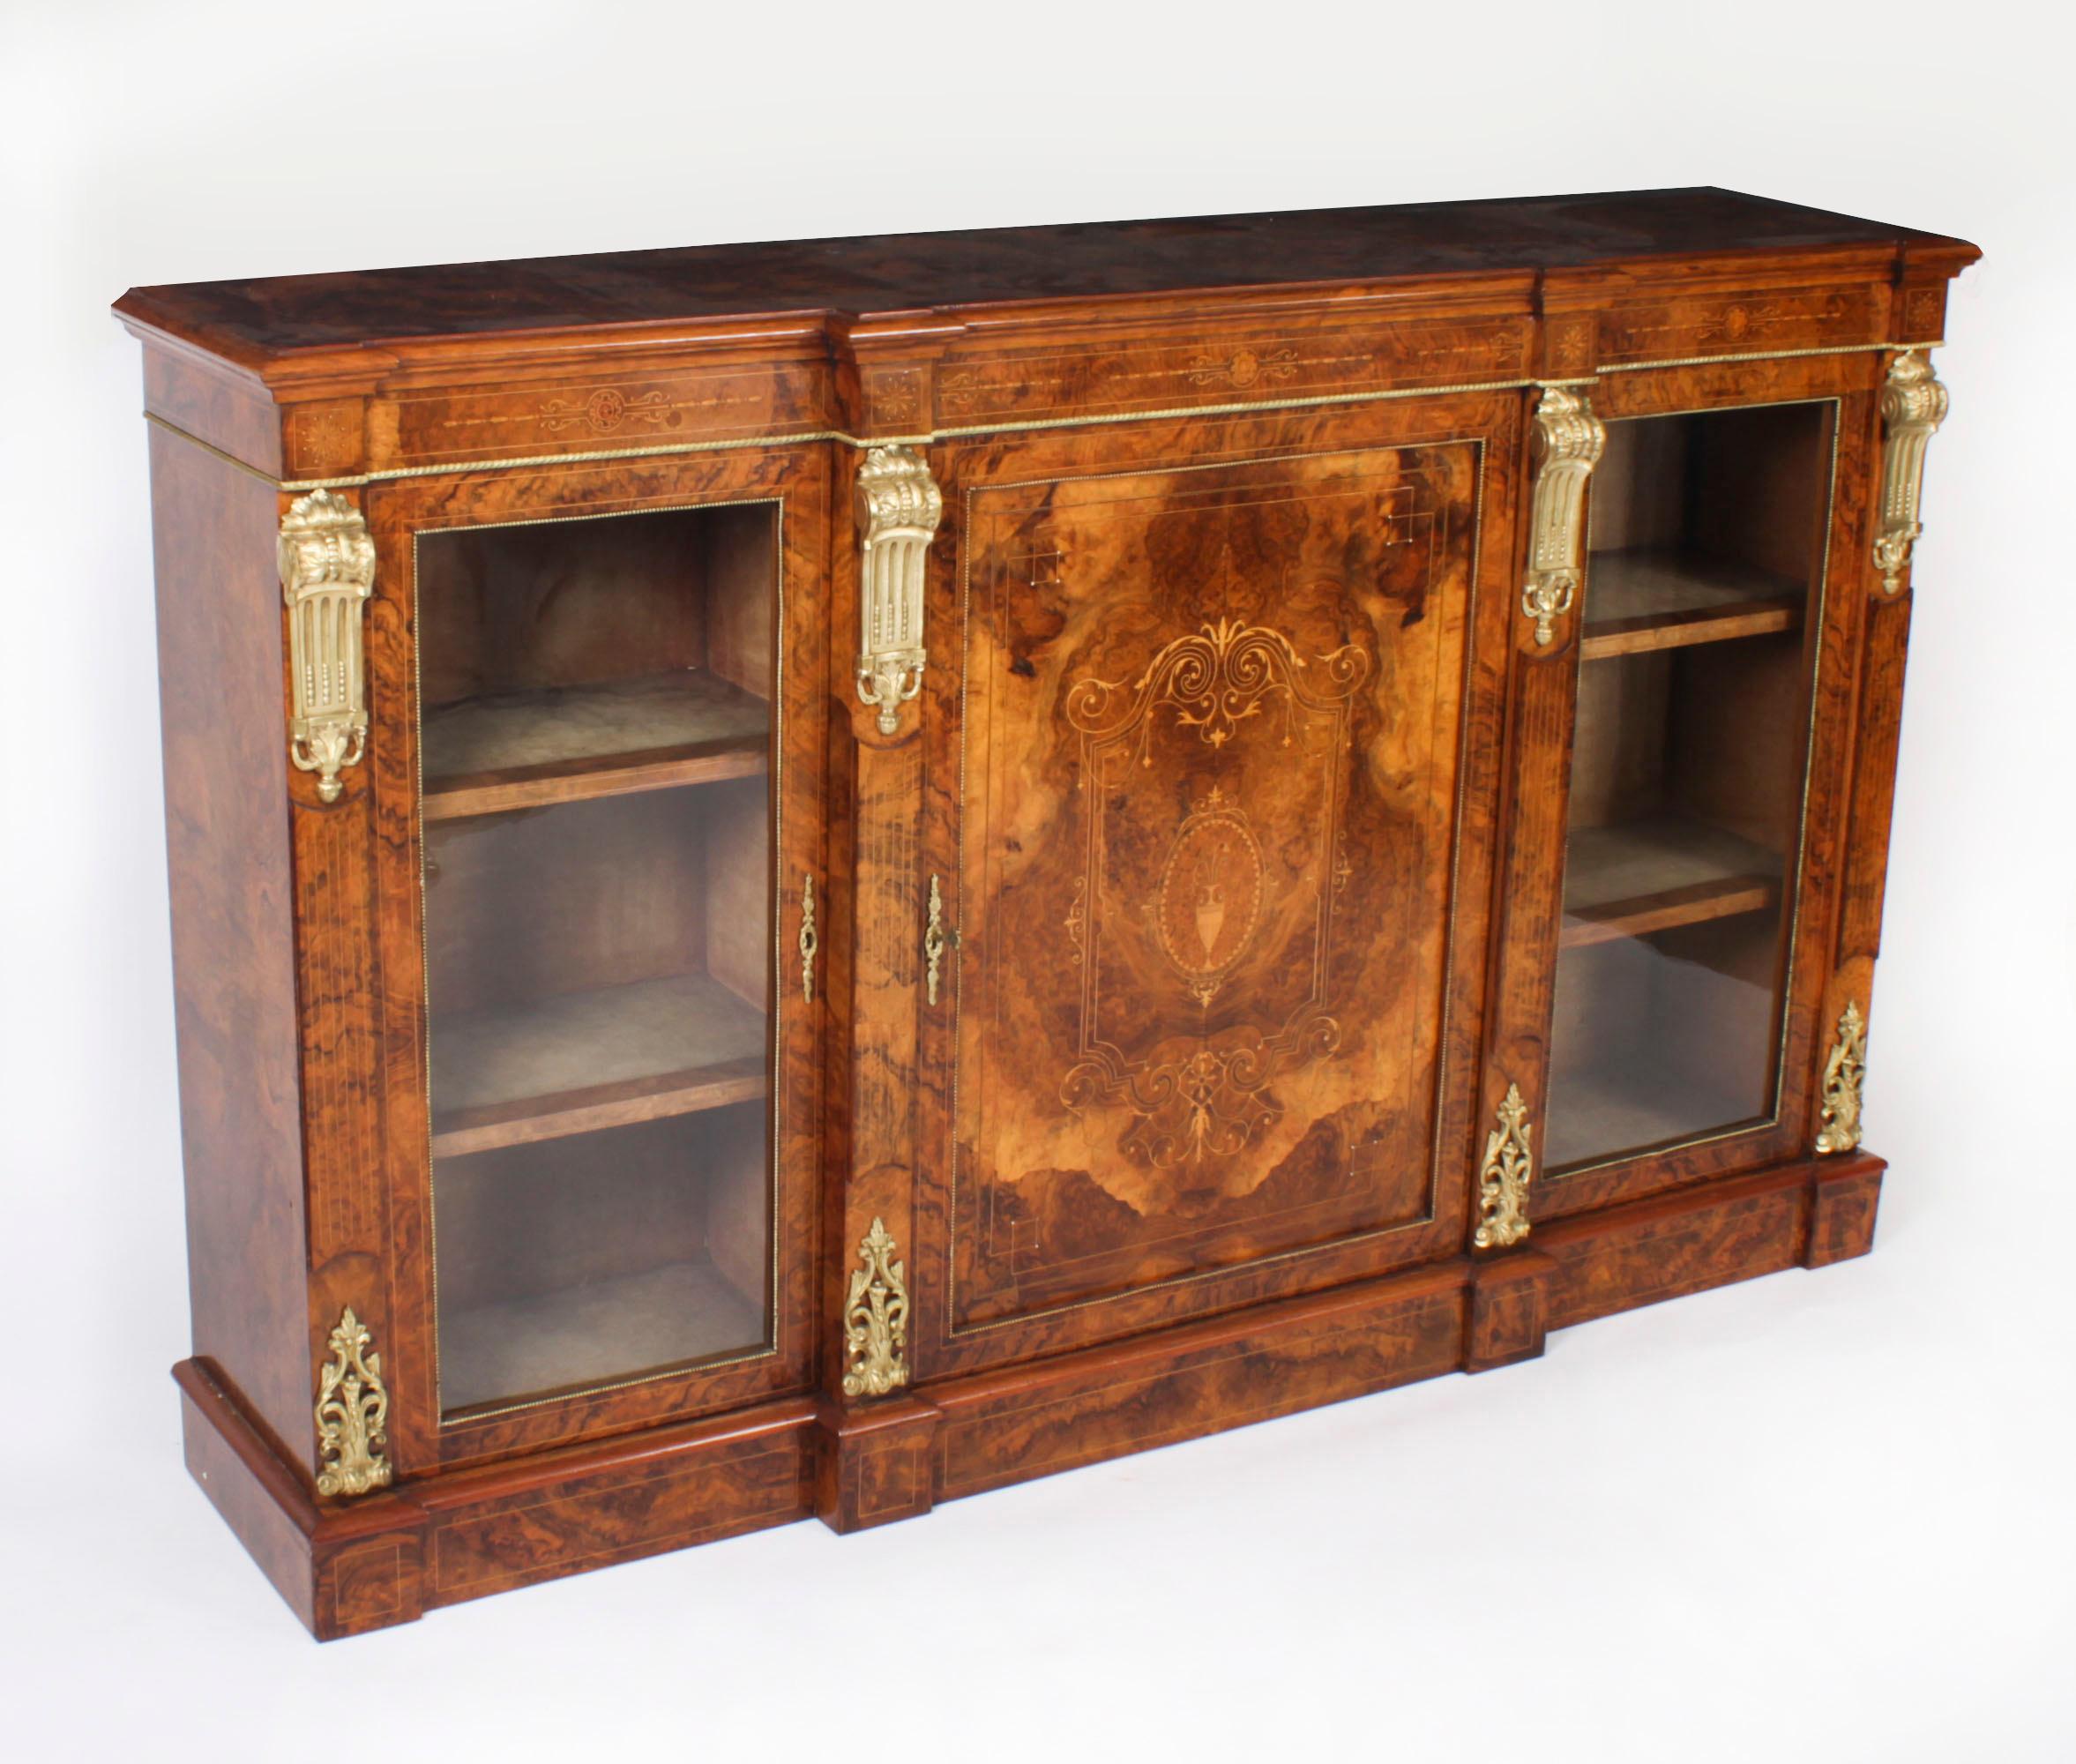 A superb antique Victorian burr walnut credenza, Circa 1860 in date.

Displaying sophistication and charm, this credenza is the absolute epitome of Victorian high society. Its attention to detail and lavish decoration are certain to draw the eye